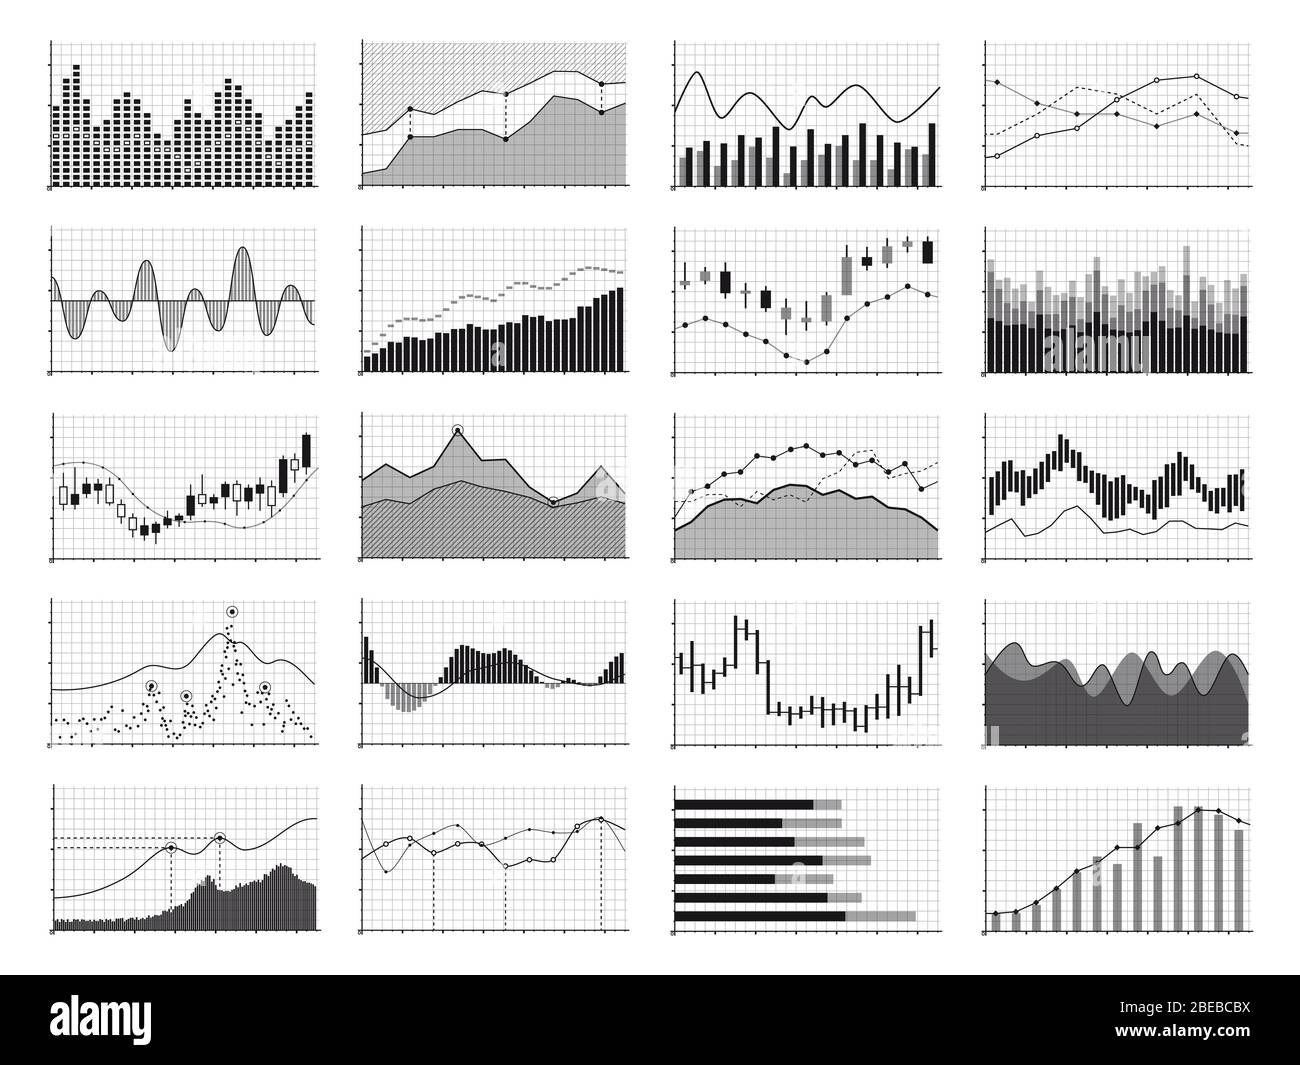 Stock analysis graphics or business data financial charts isolated on white background. Chart and graph, financial diagram growth and progress, vector illustration Stock Vector